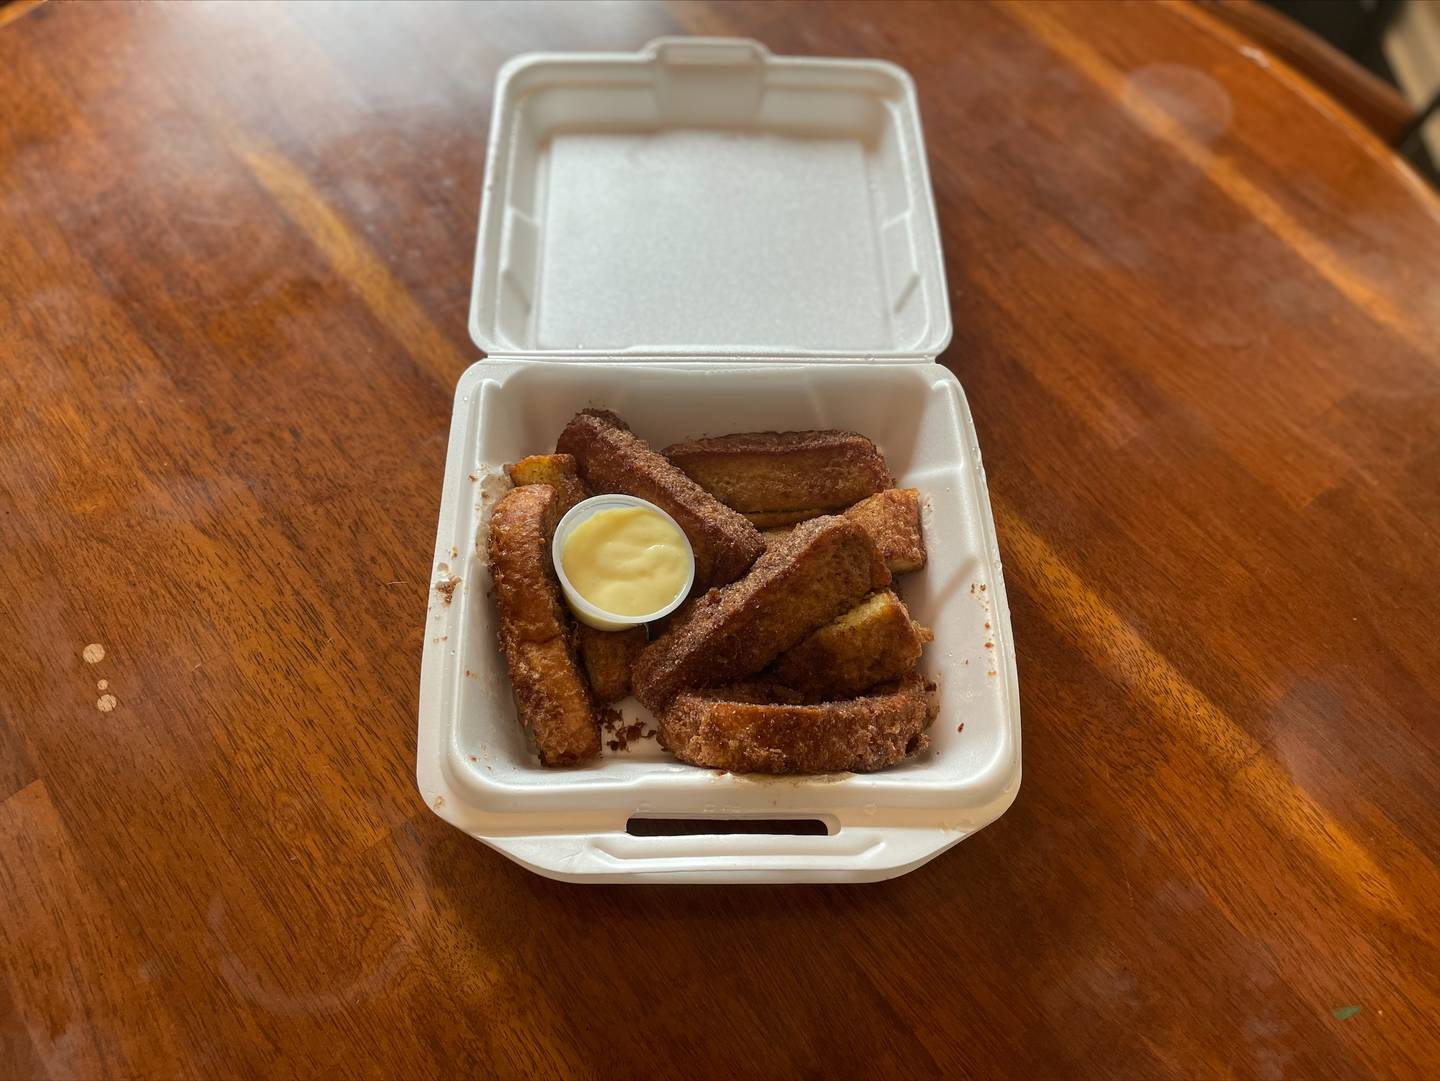 French Toast Sticks from Eggceptional Cafe, 2749 Algonquin Rd., Algonquin.